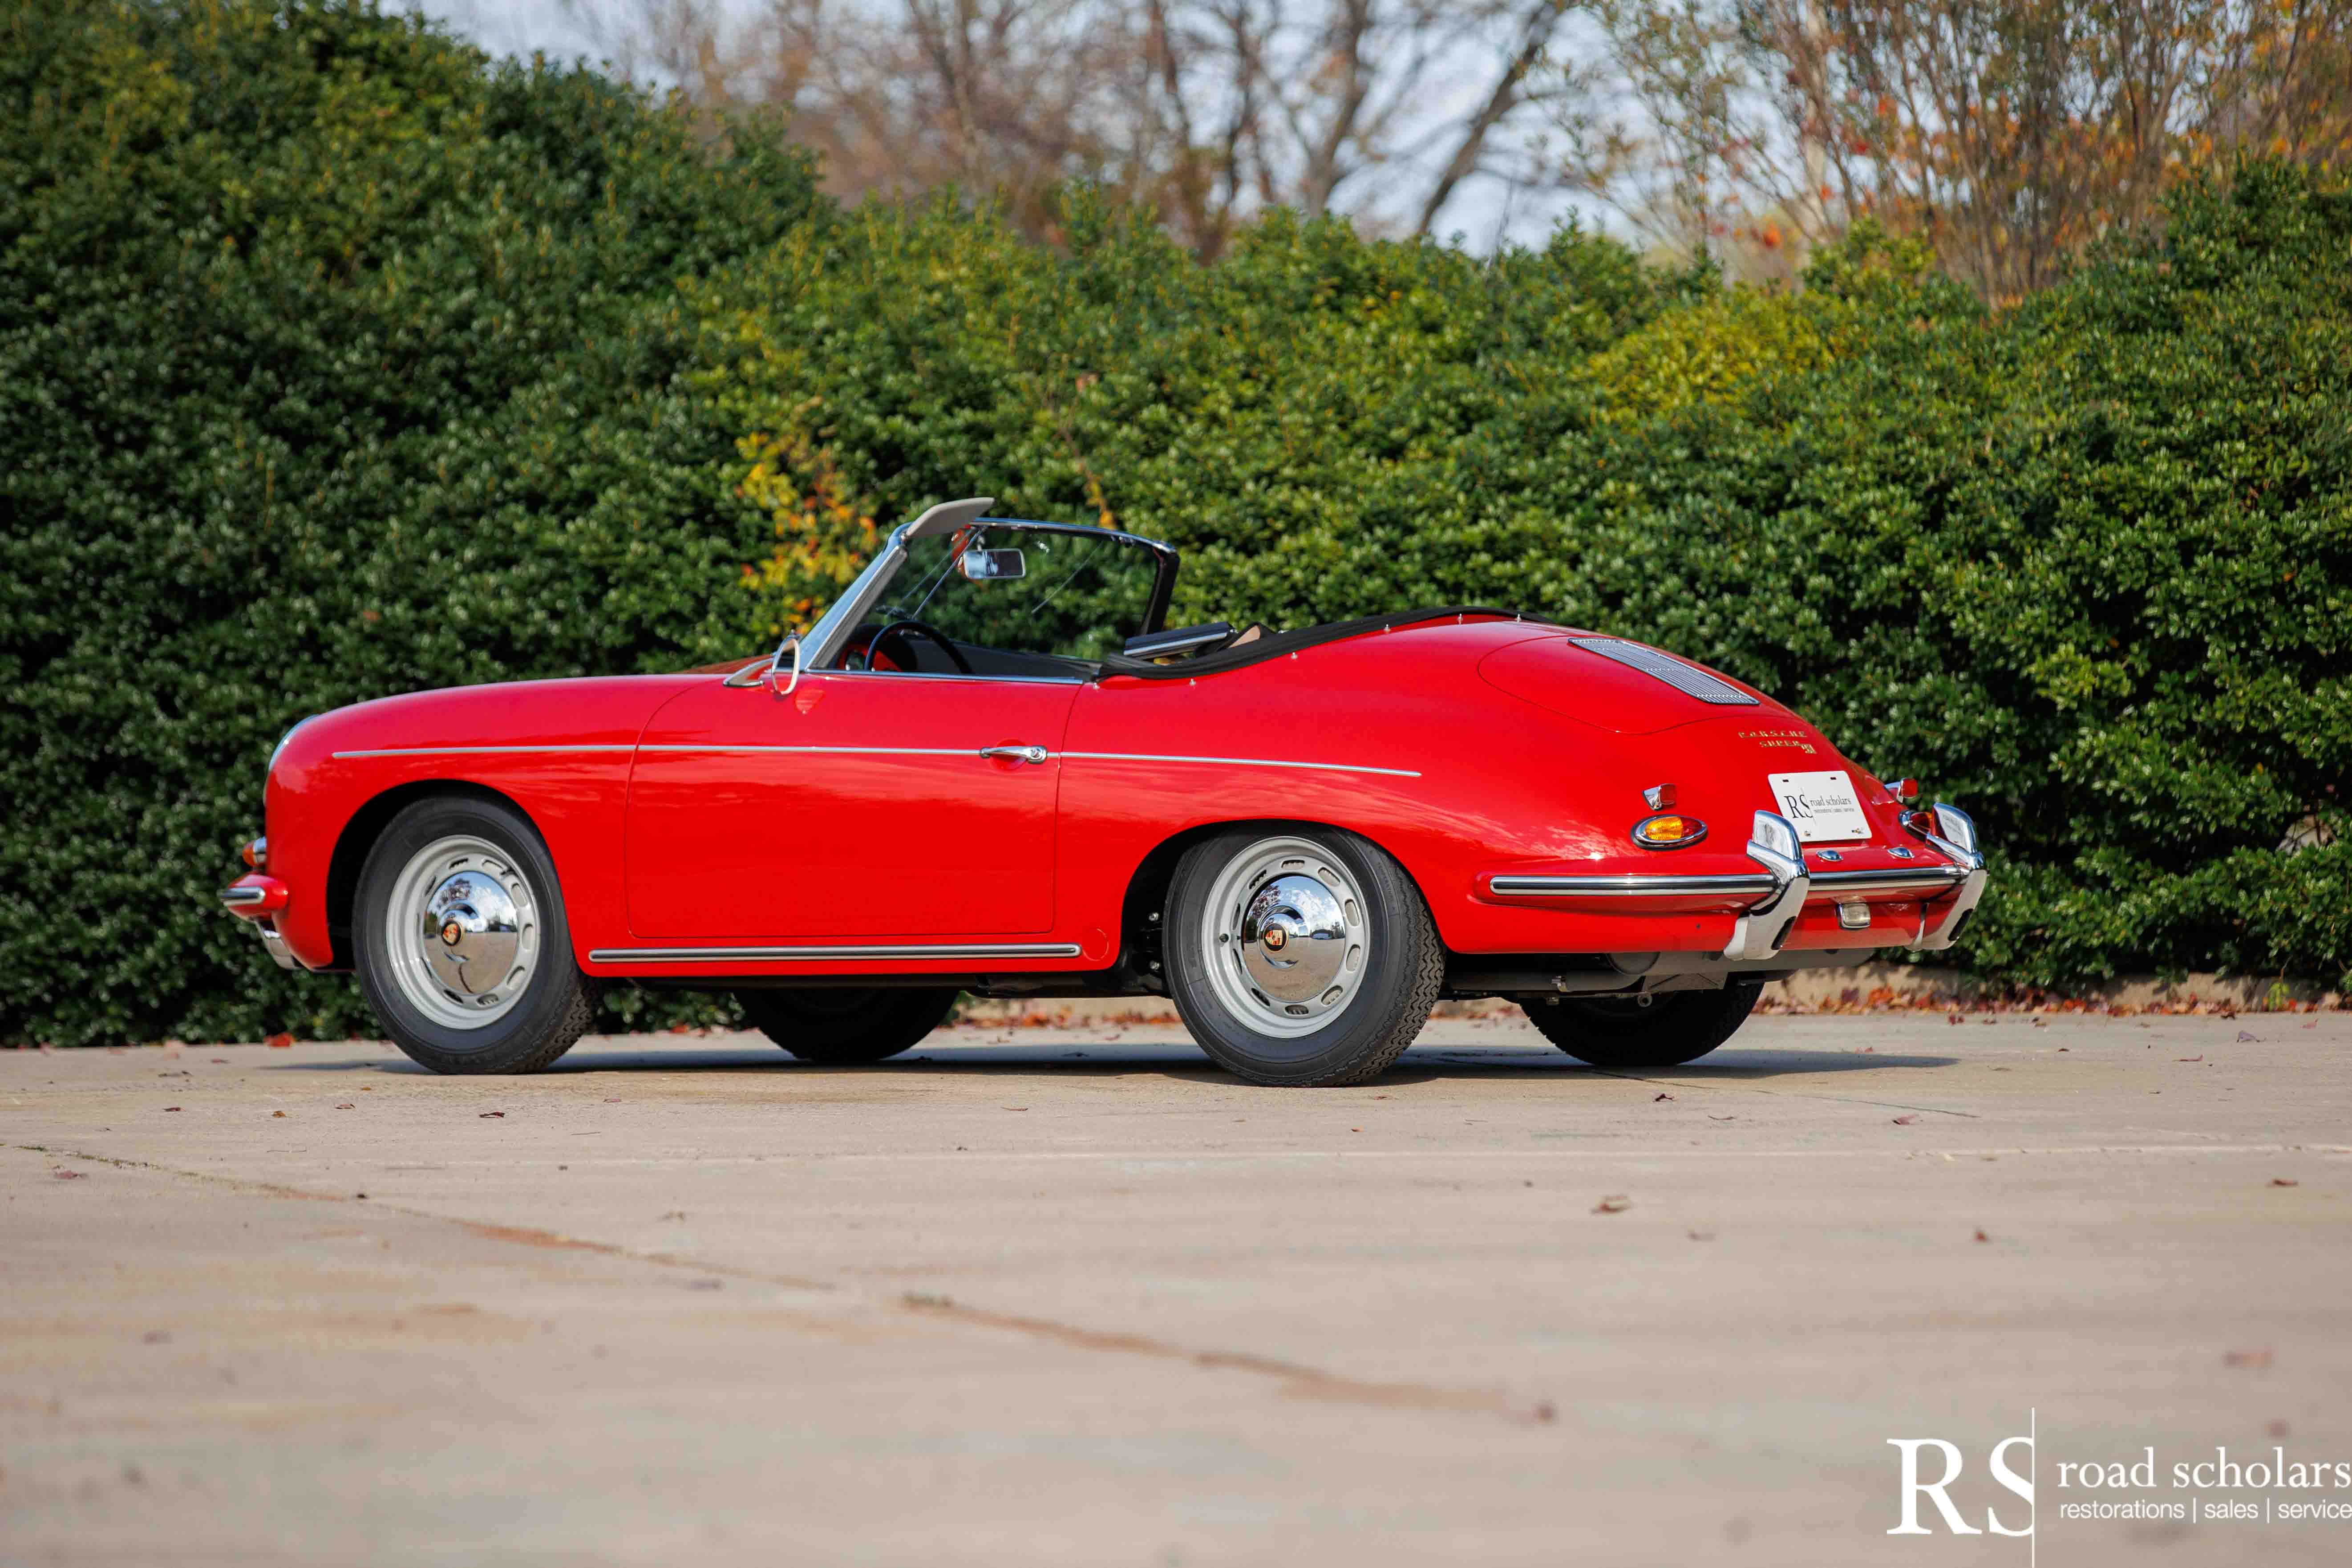 1961 Porsche 356B Super 90 (T5) Roadster chassis 89305 (watermarked)-67